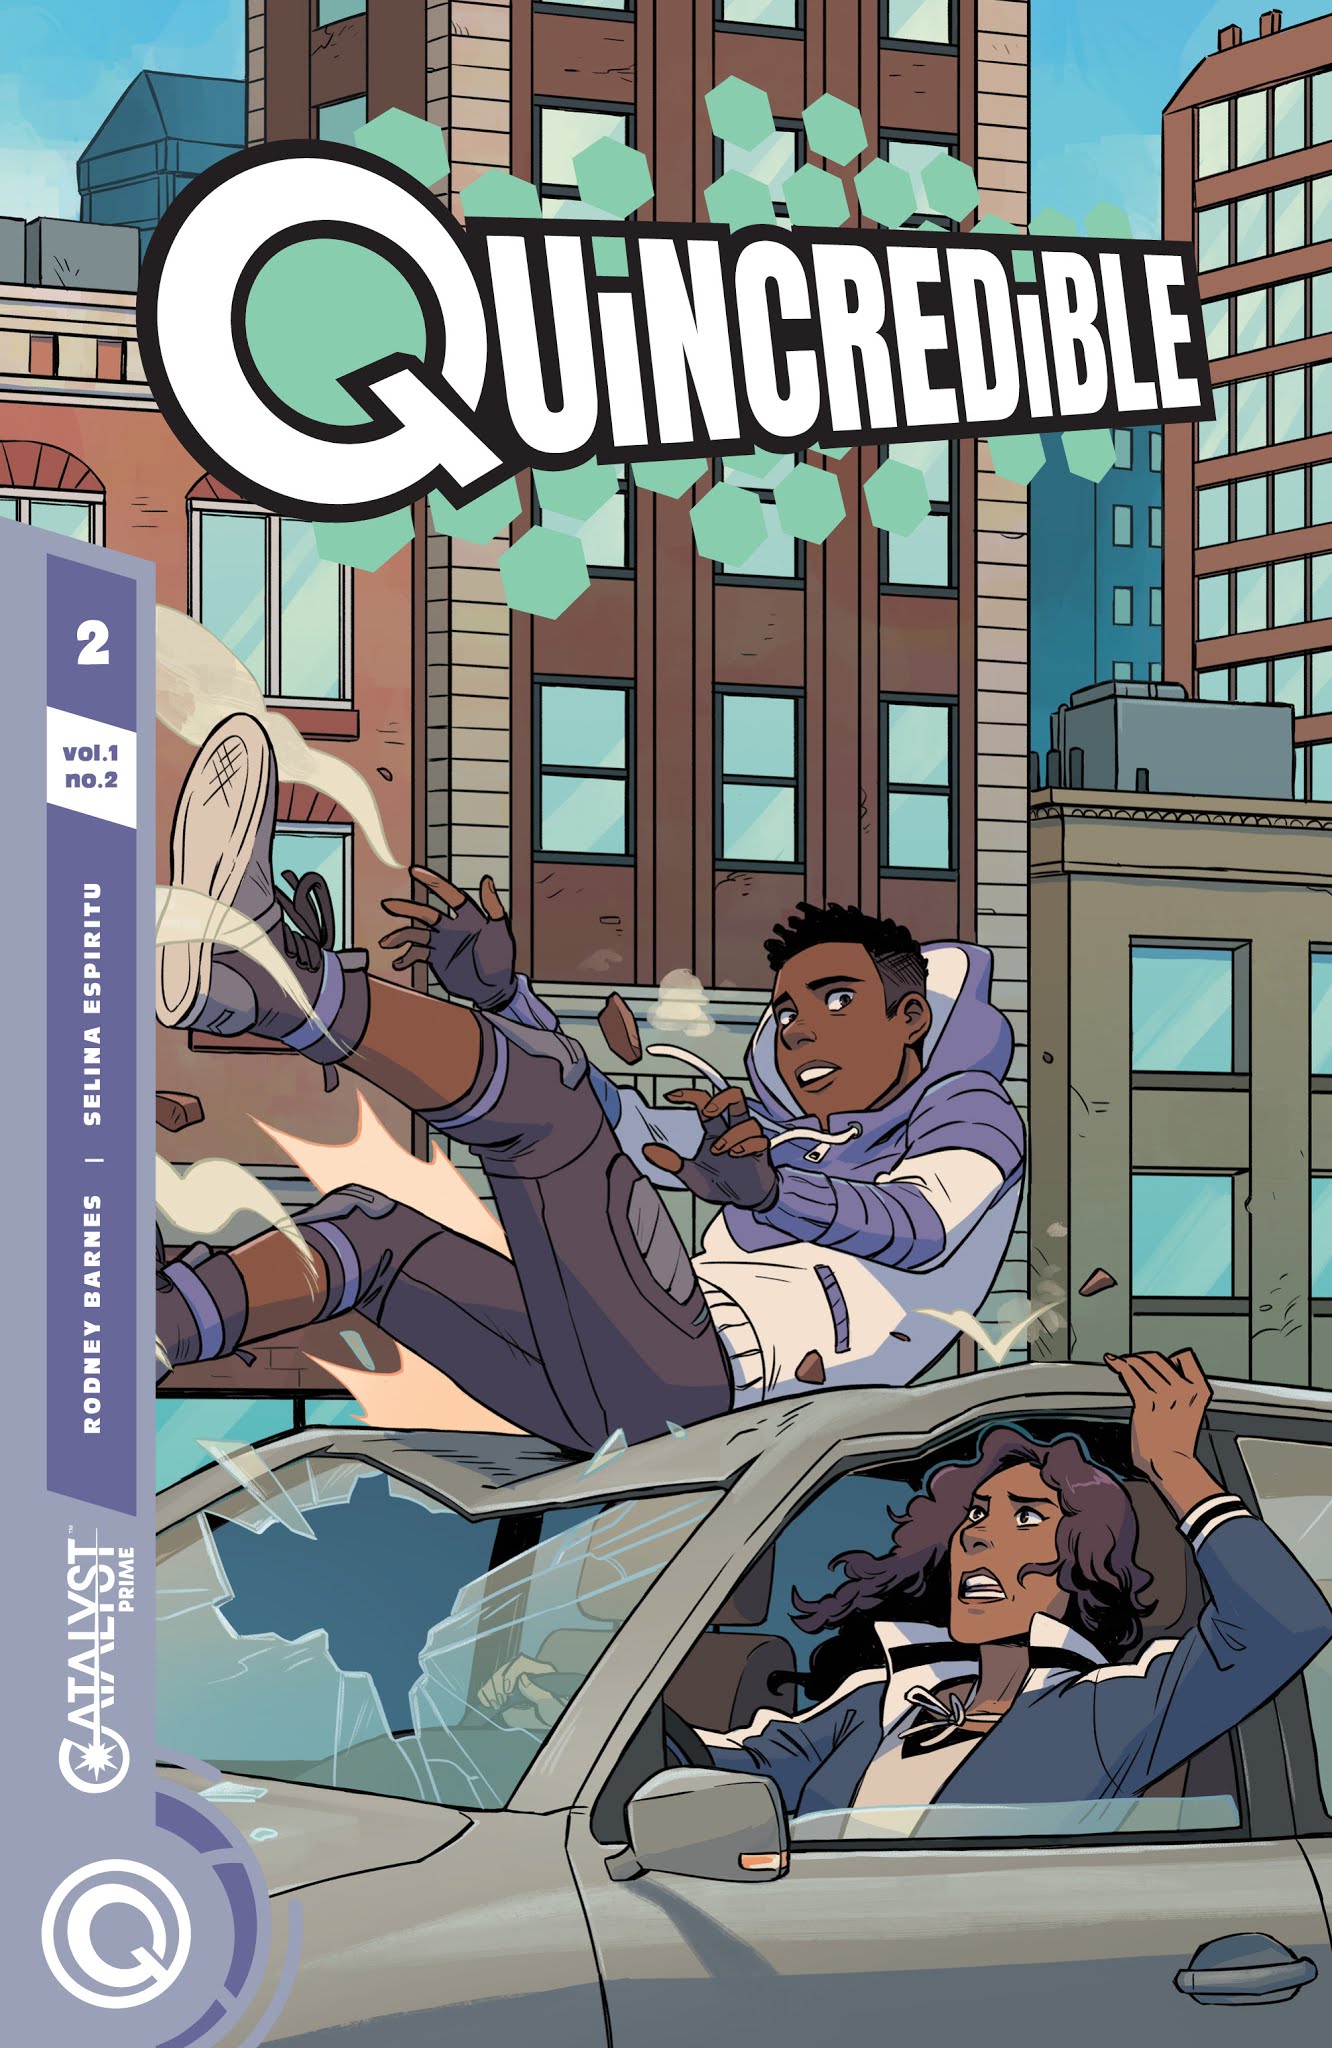 Read online Quincredible comic -  Issue #2 - 1